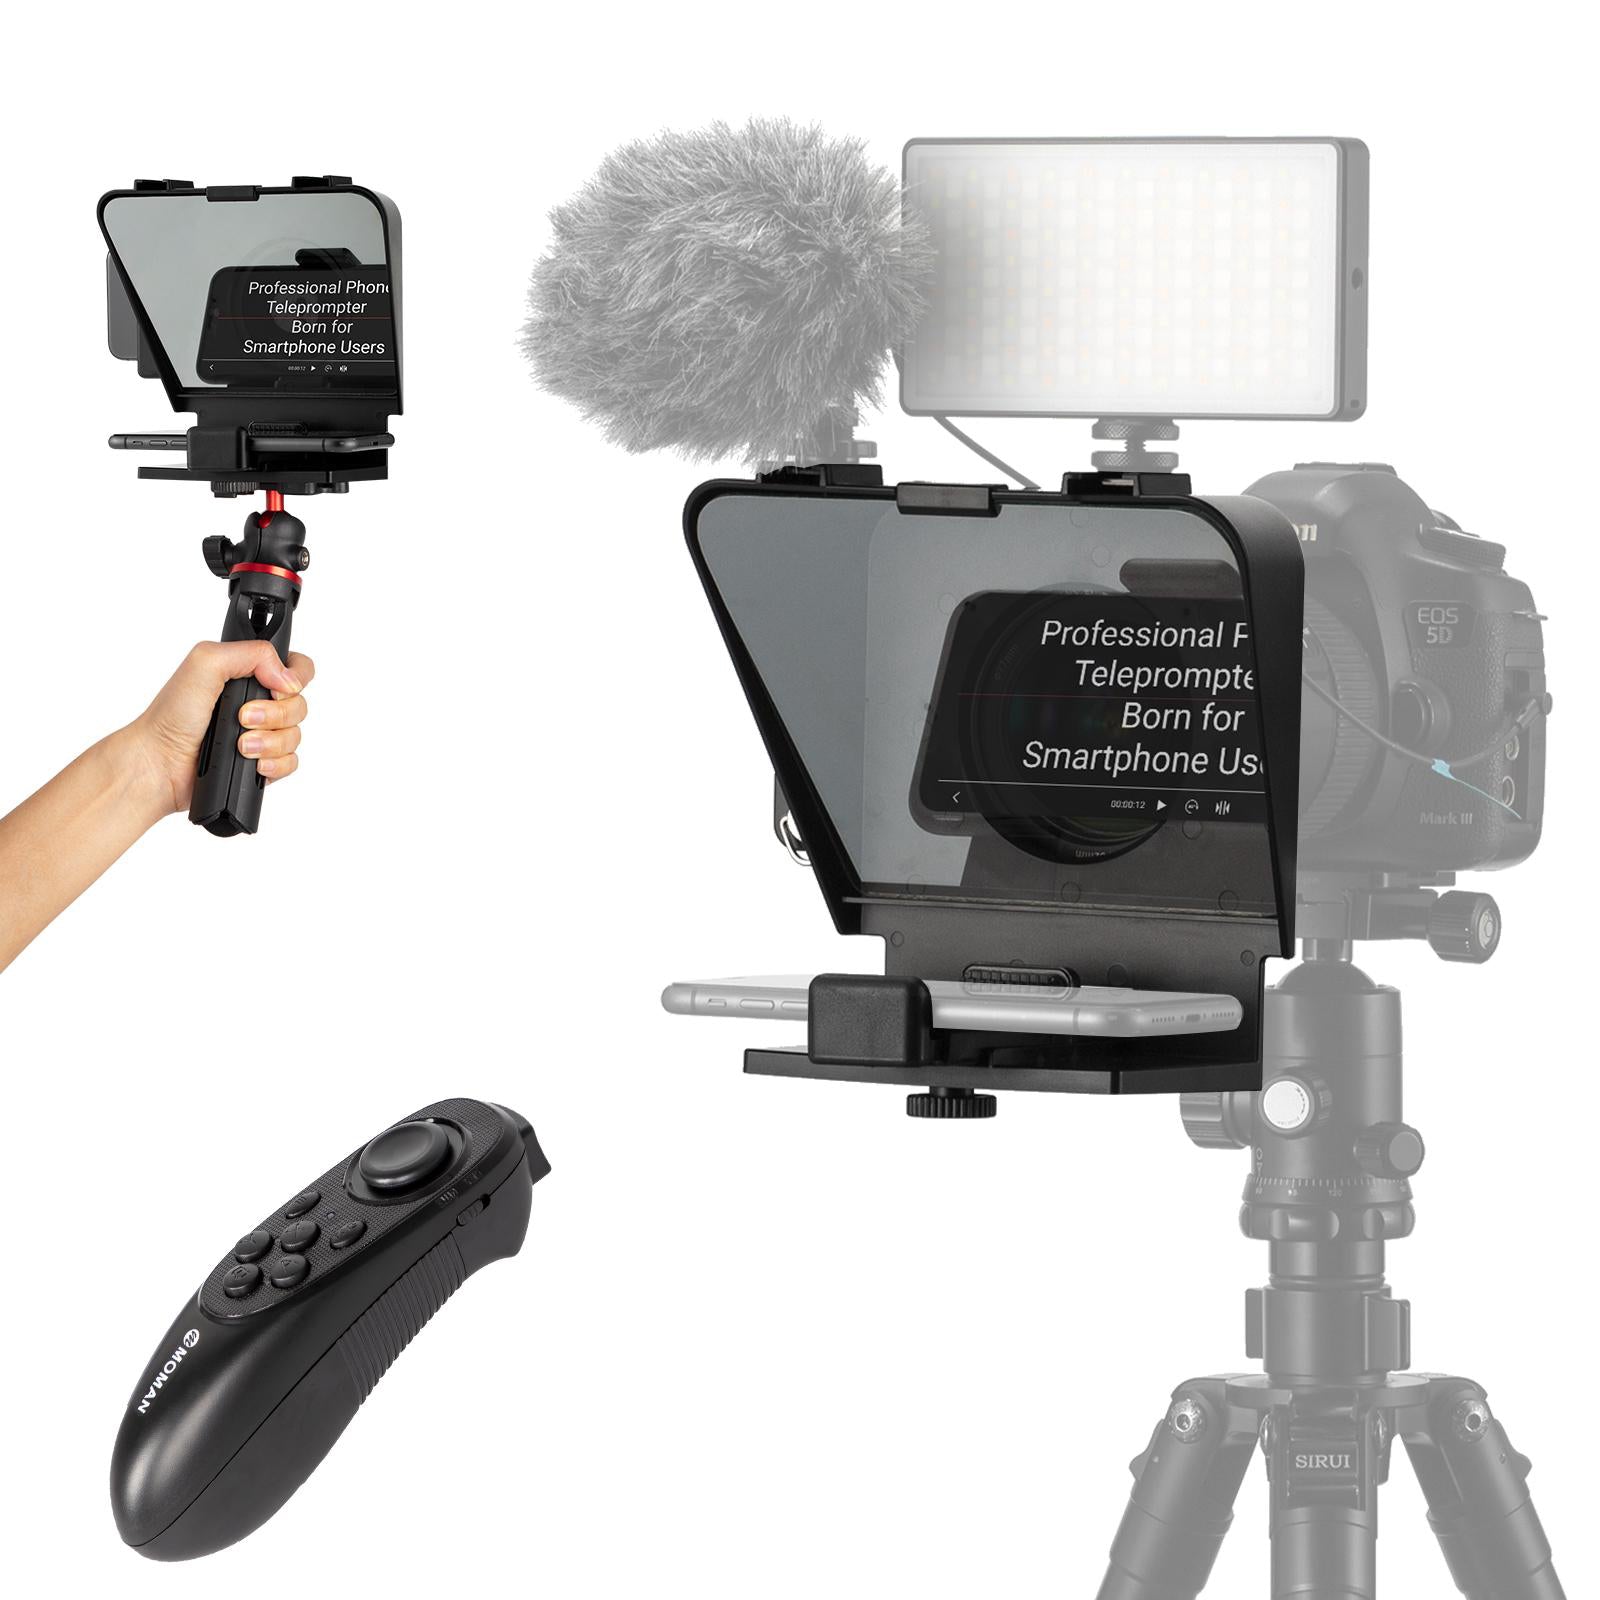 Smartphone teleprompter Moman MT1 achieves excellent light reflection and transmittance, being ideal for mobile shooting